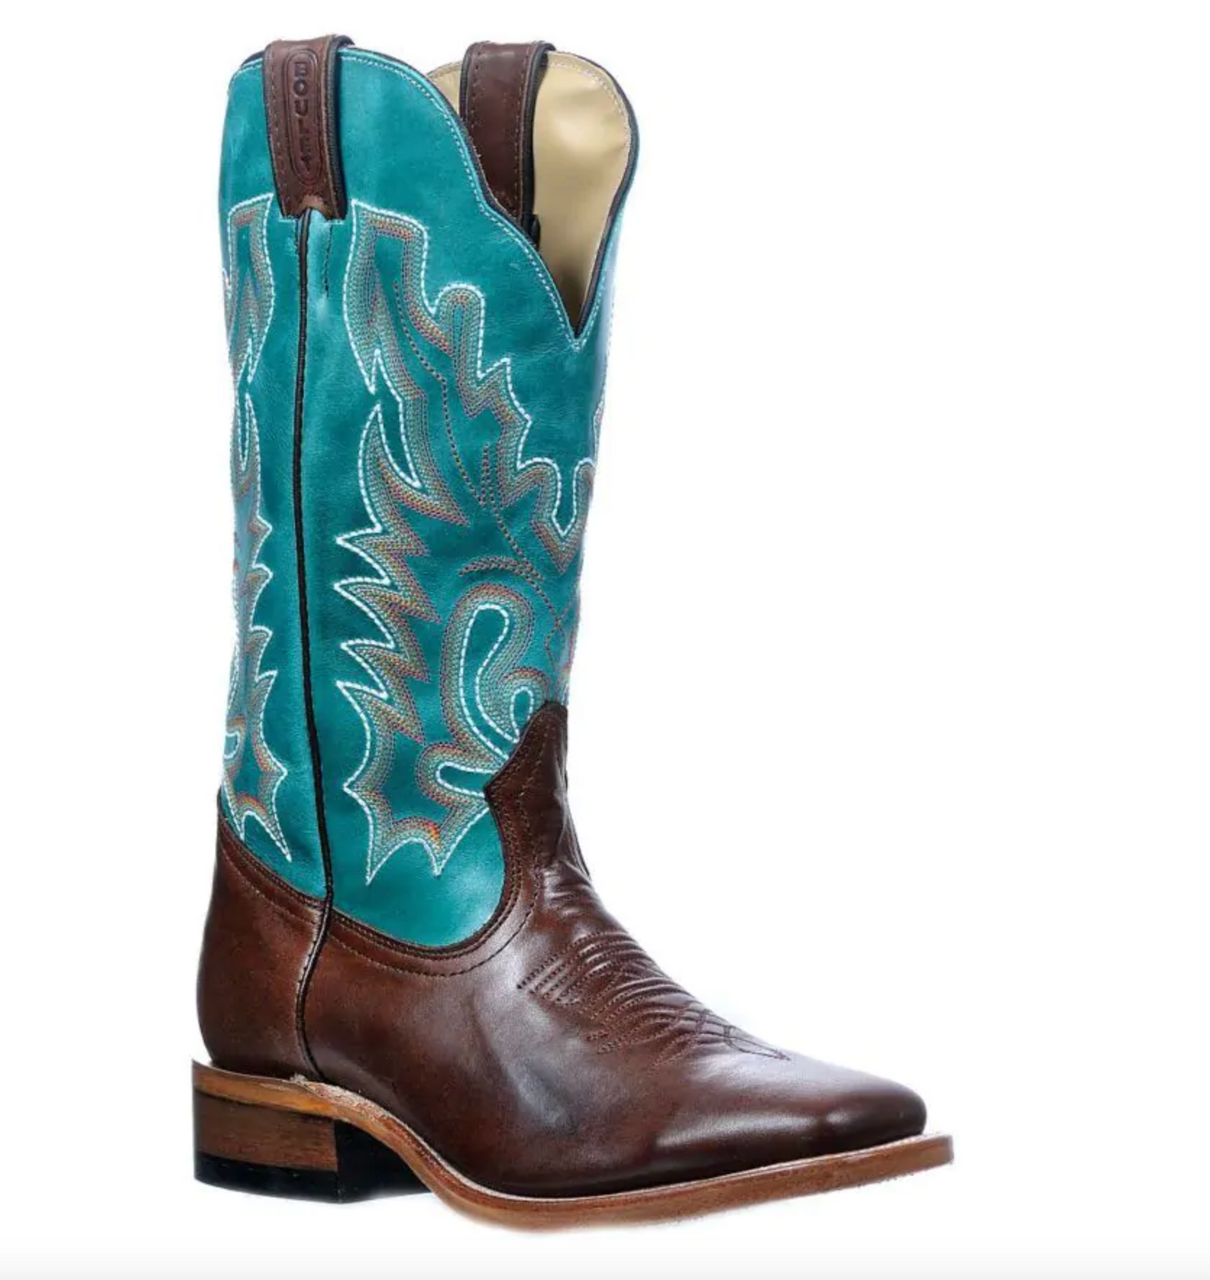 Women's Boulet Cowgirl Boots Brown & Turquoise - OLD FORT WESTERN